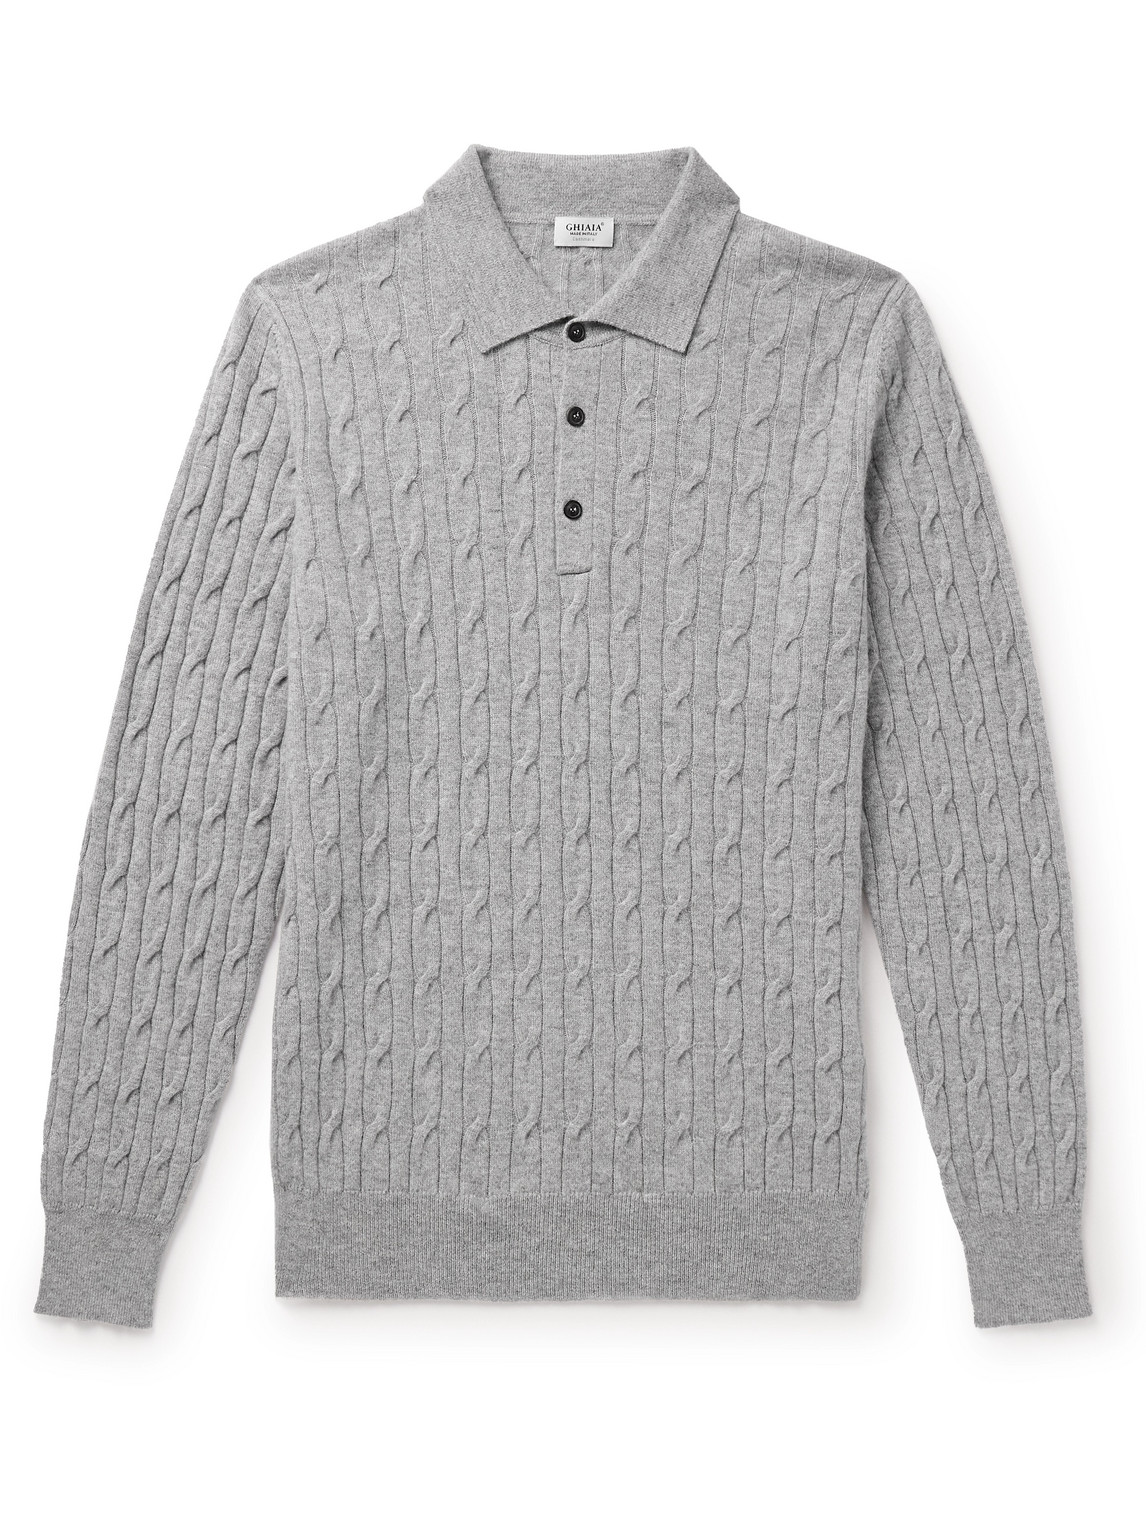 Ghiaia Cashmere Cable-knit Cashmere Polo Shirt In Grey